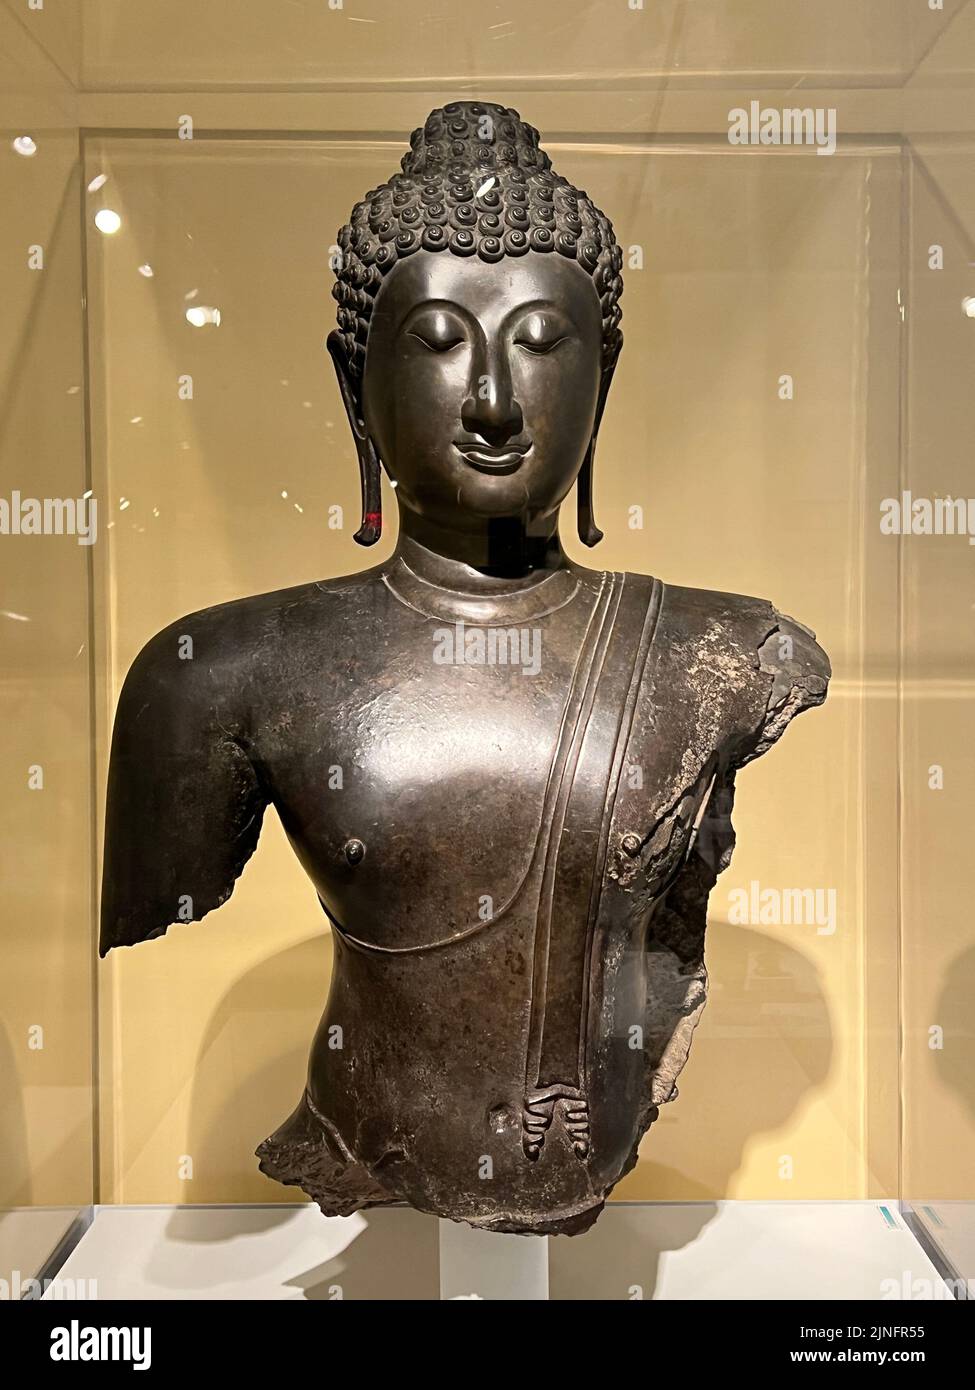 Head and Torso of a Buddha; Bronze, 14th to 15th century, Thailand, Sukhothai Period. Brooklyn Museum. Stock Photo